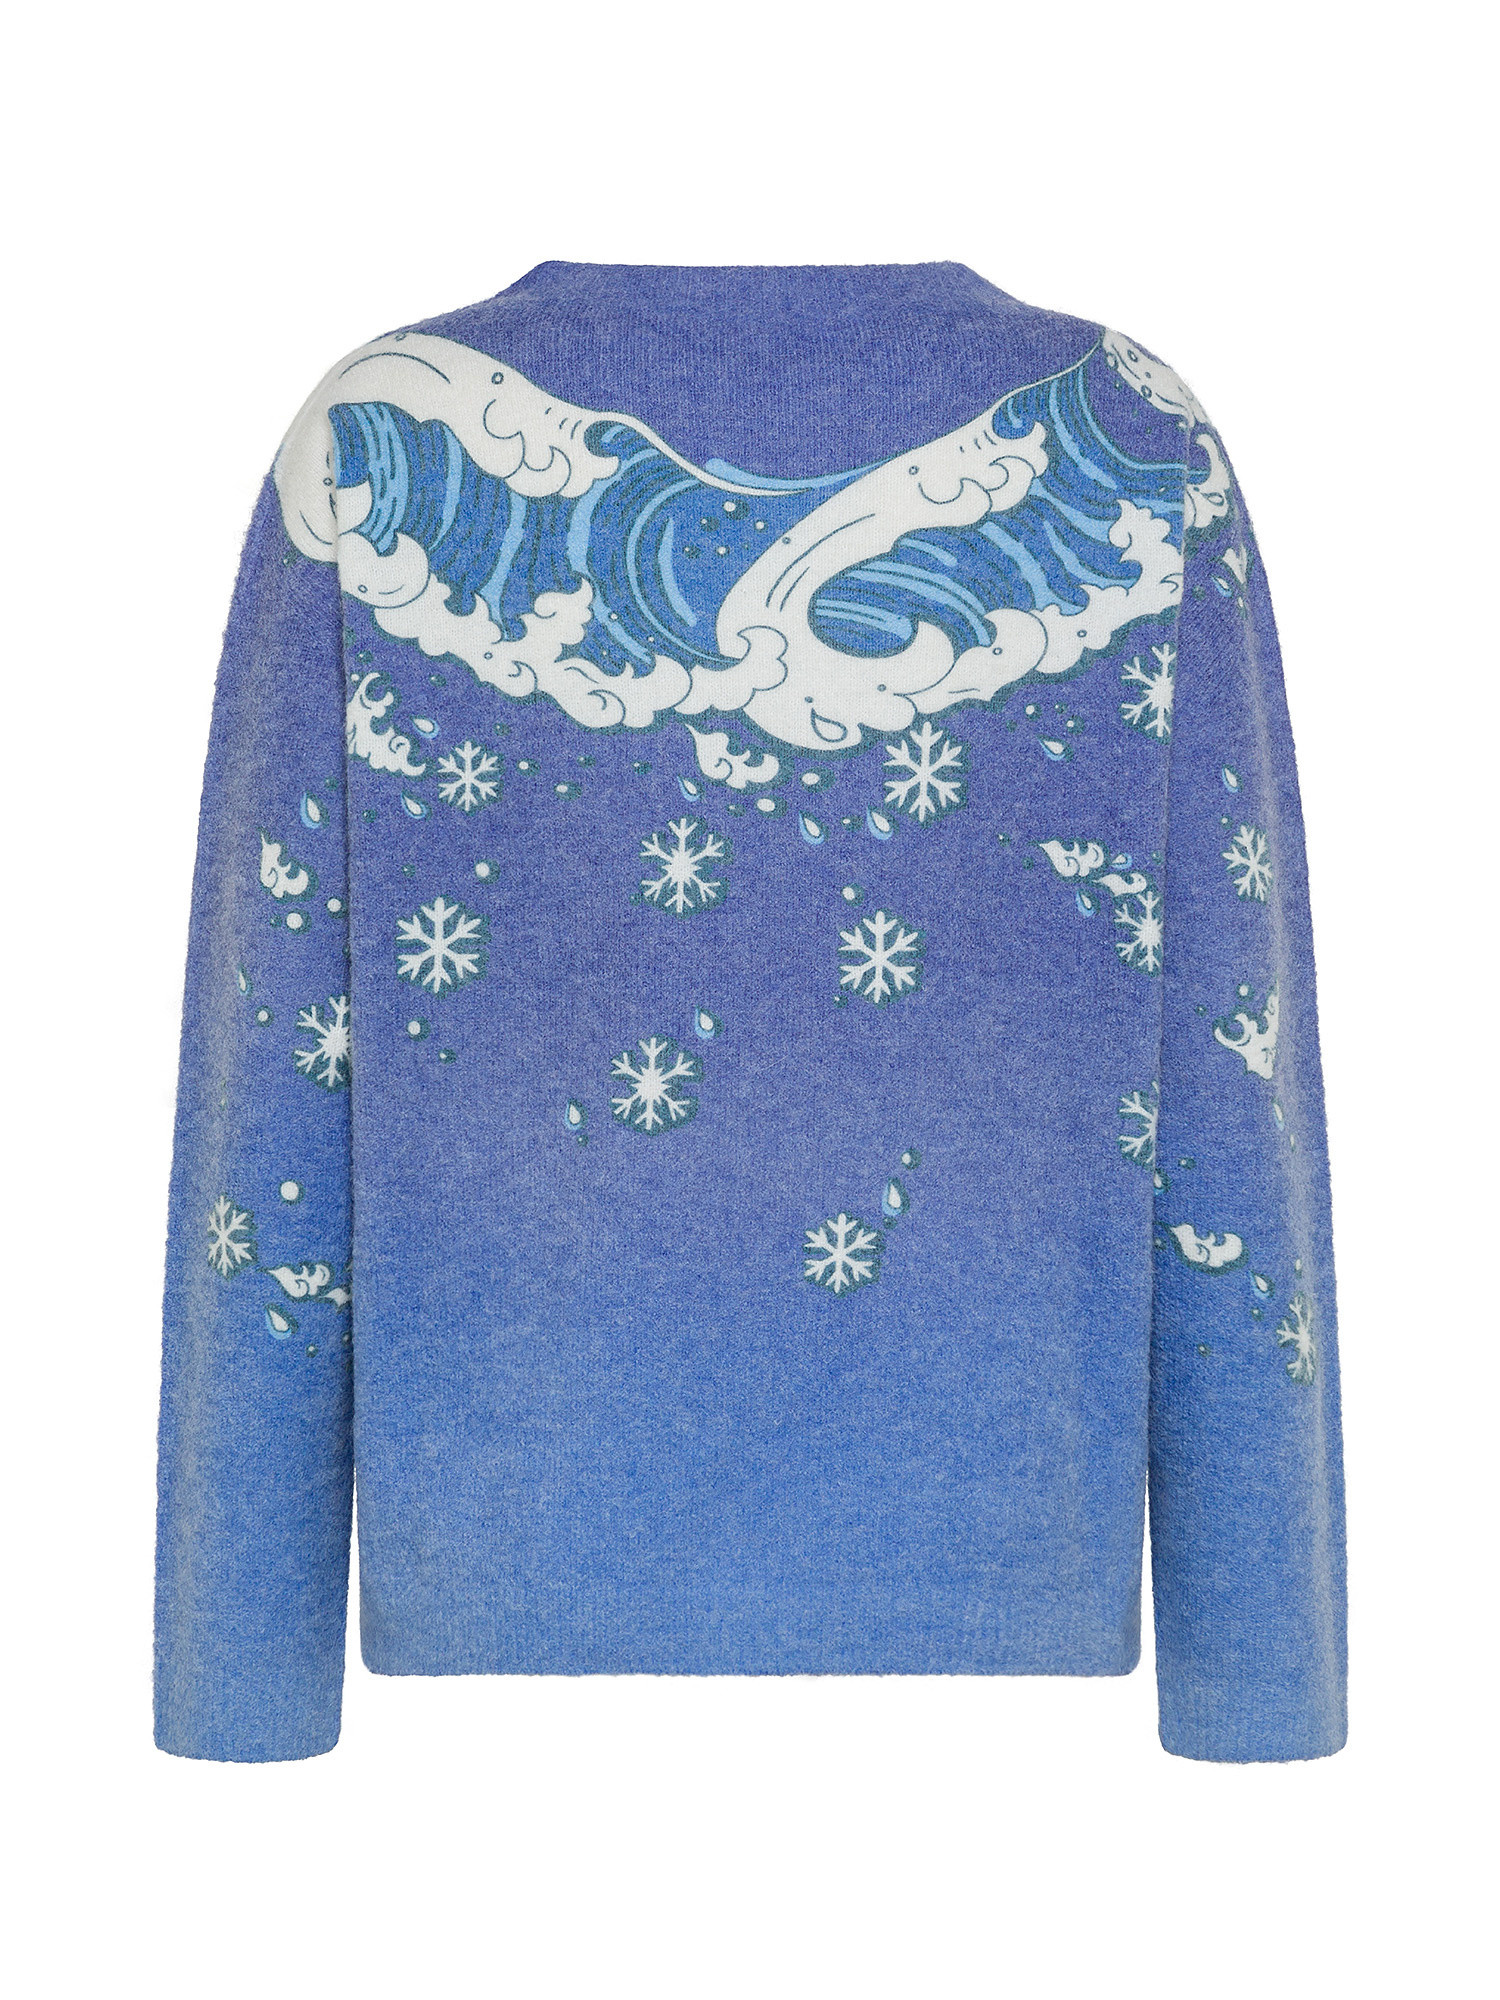 Pullover The Surfer’s Christmas by Paula Cademartori, Blu, large image number 1